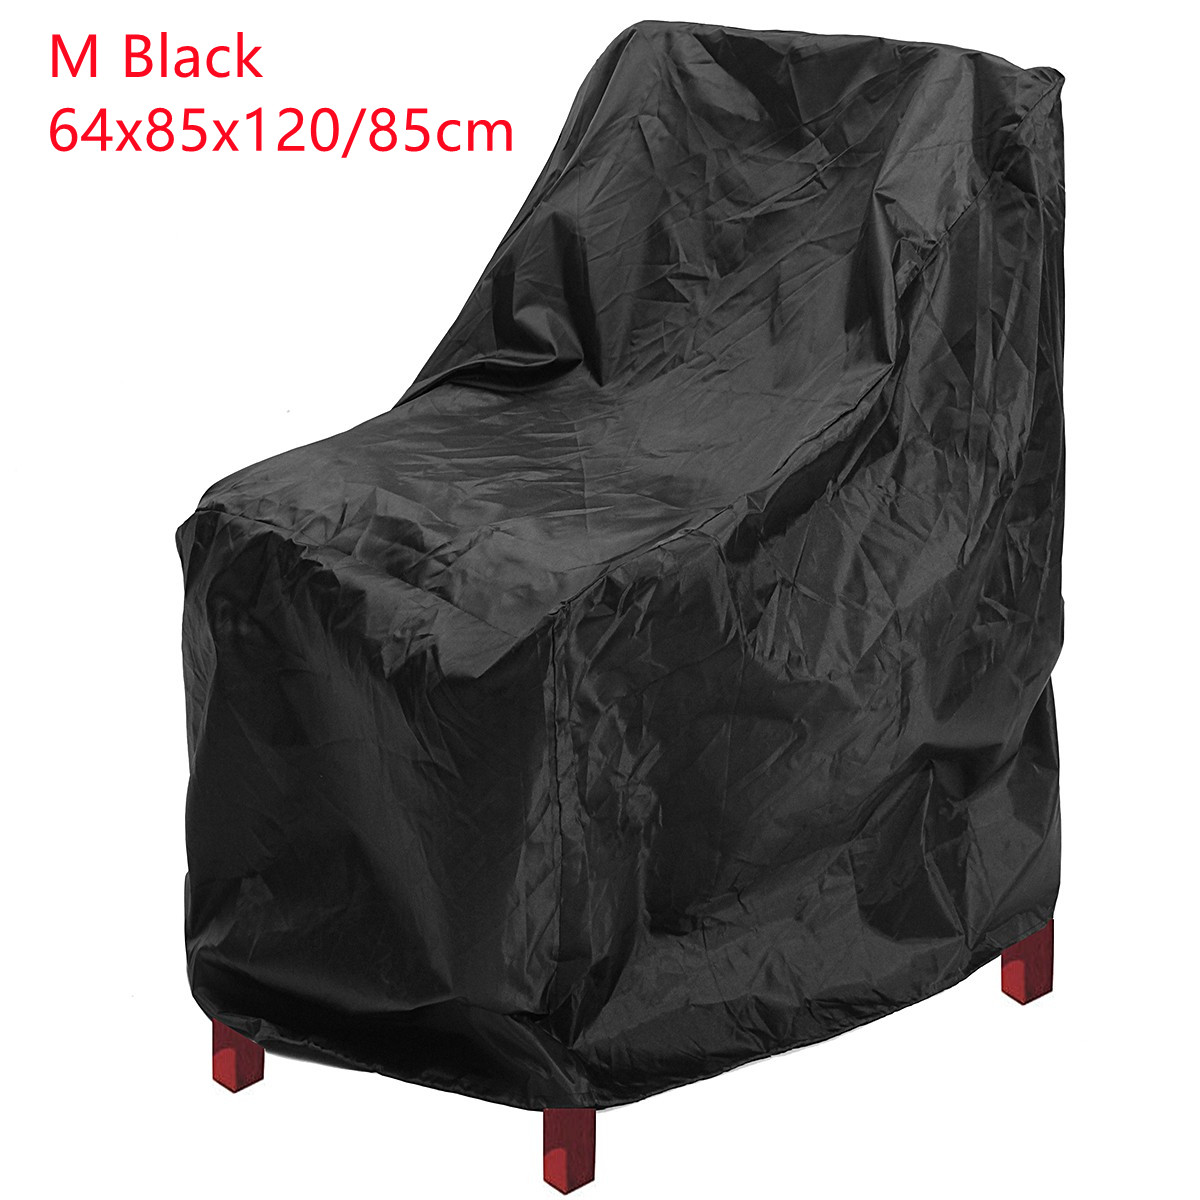 KING-DO-WAY-Patio-Chair-Covers-Oxford-Cloth-Waterproof-Windproof-Garden-Furniture-Covers-1894158-1